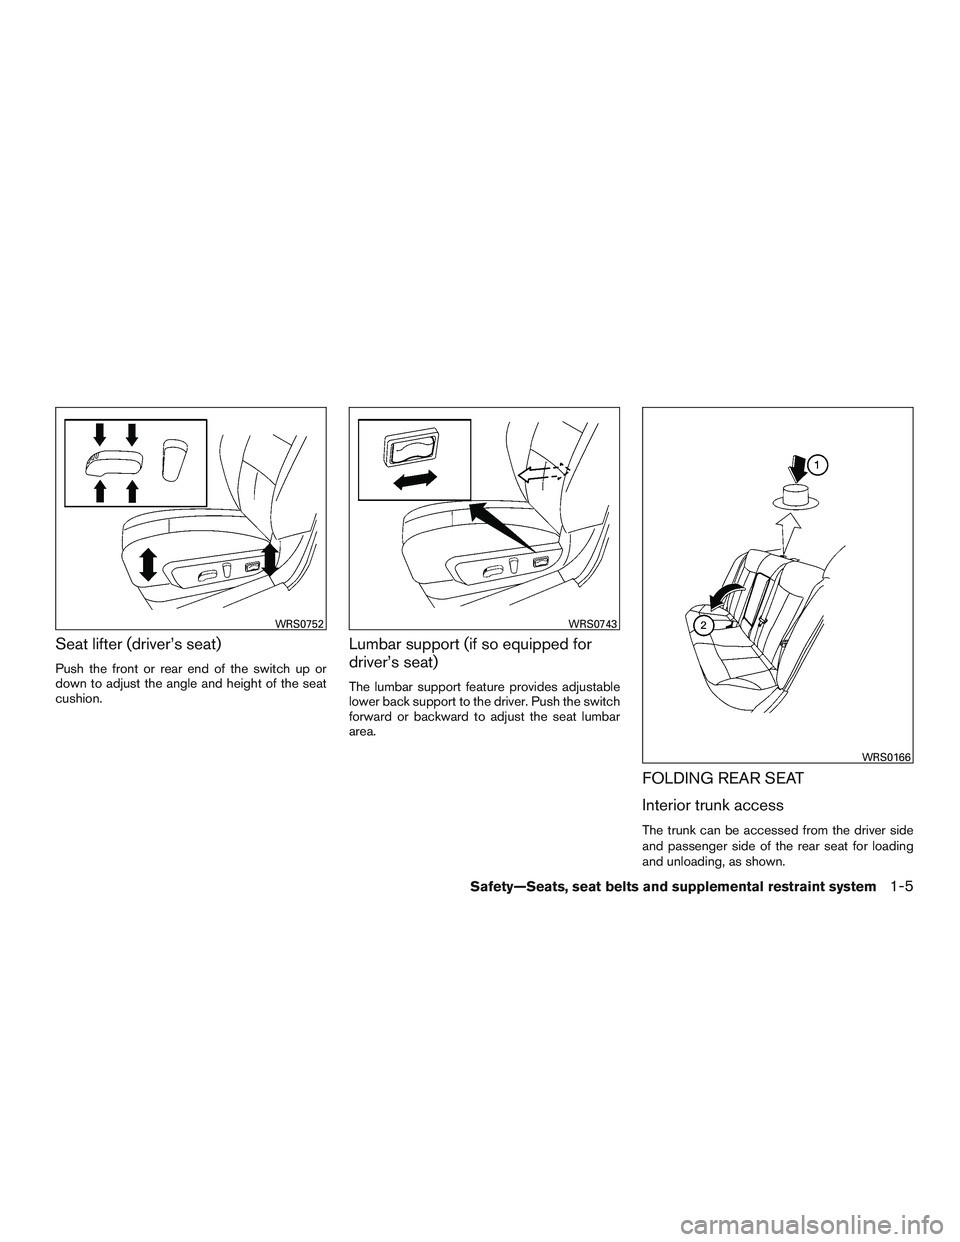 NISSAN ALTIMA SEDAN 2015 Owners Manual Seat lifter (driver’s seat)
Push the front or rear end of the switch up or
down to adjust the angle and height of the seat
cushion.
Lumbar support (if so equipped for
driver’s seat)
The lumbar sup